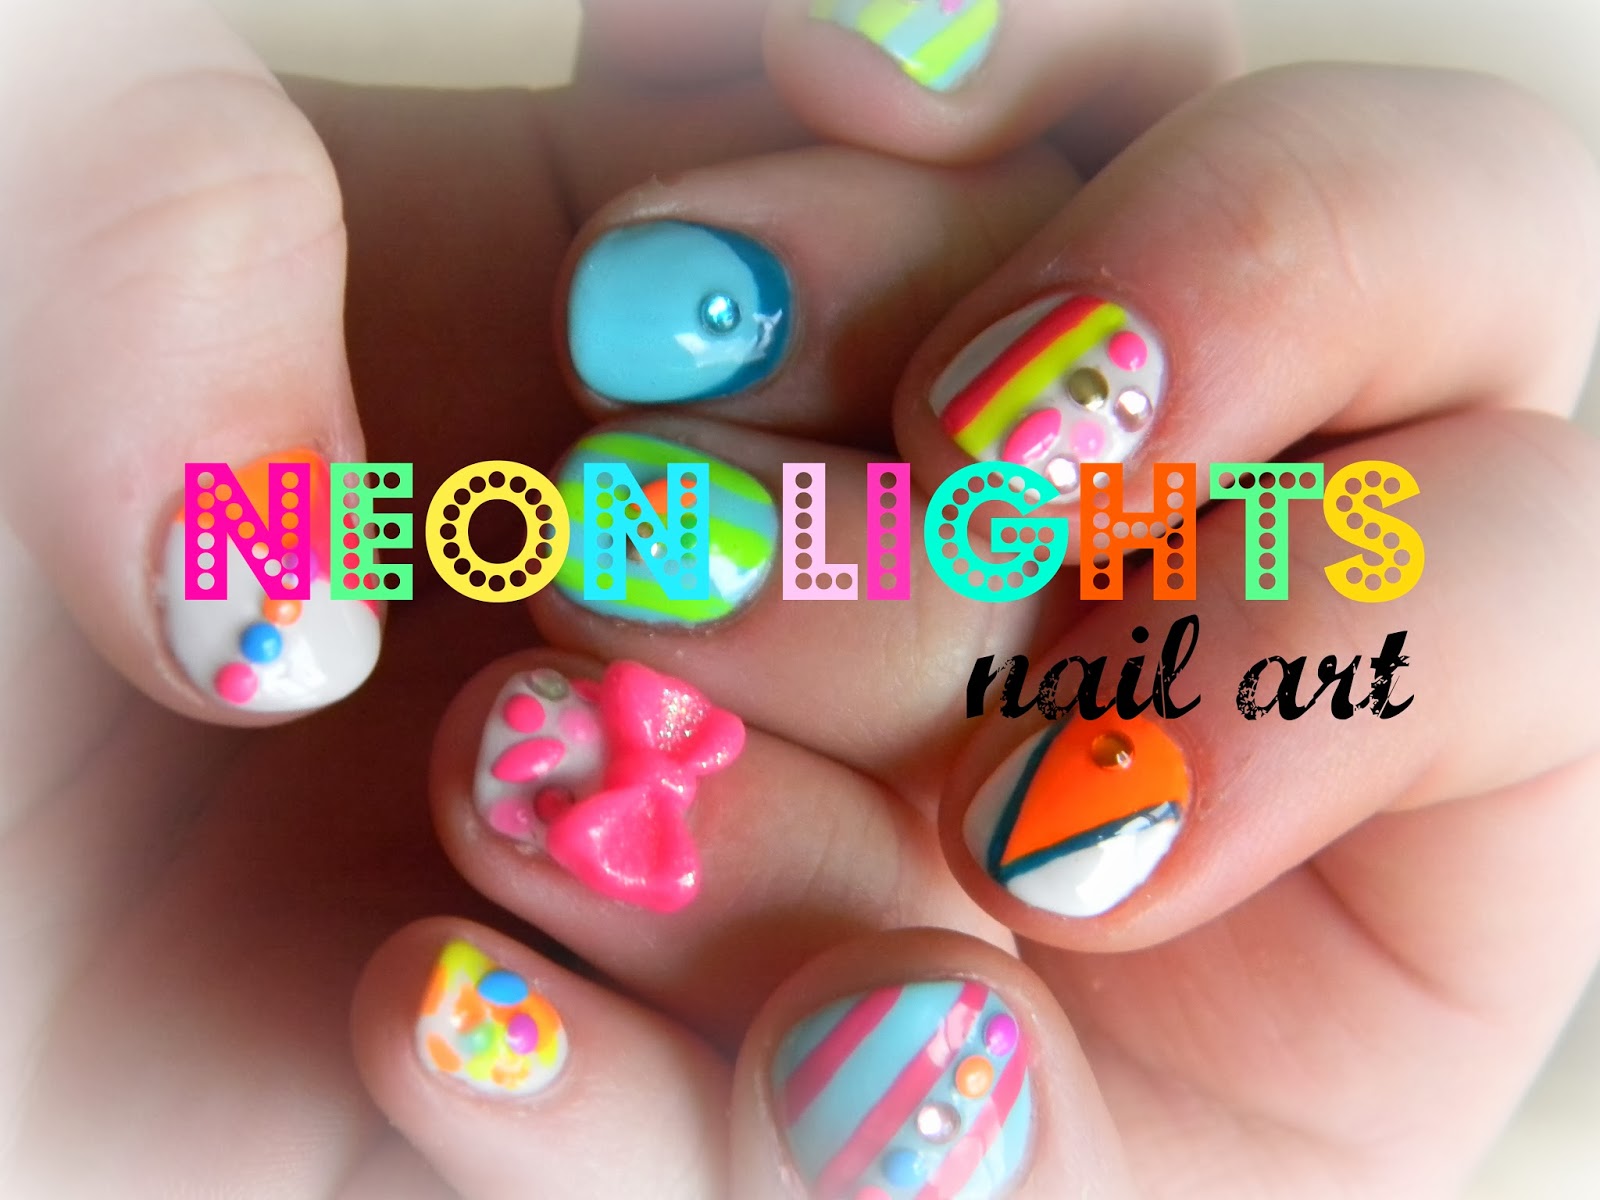 Neon Nail Art: The Hottest Trend in Nail Design - wide 9